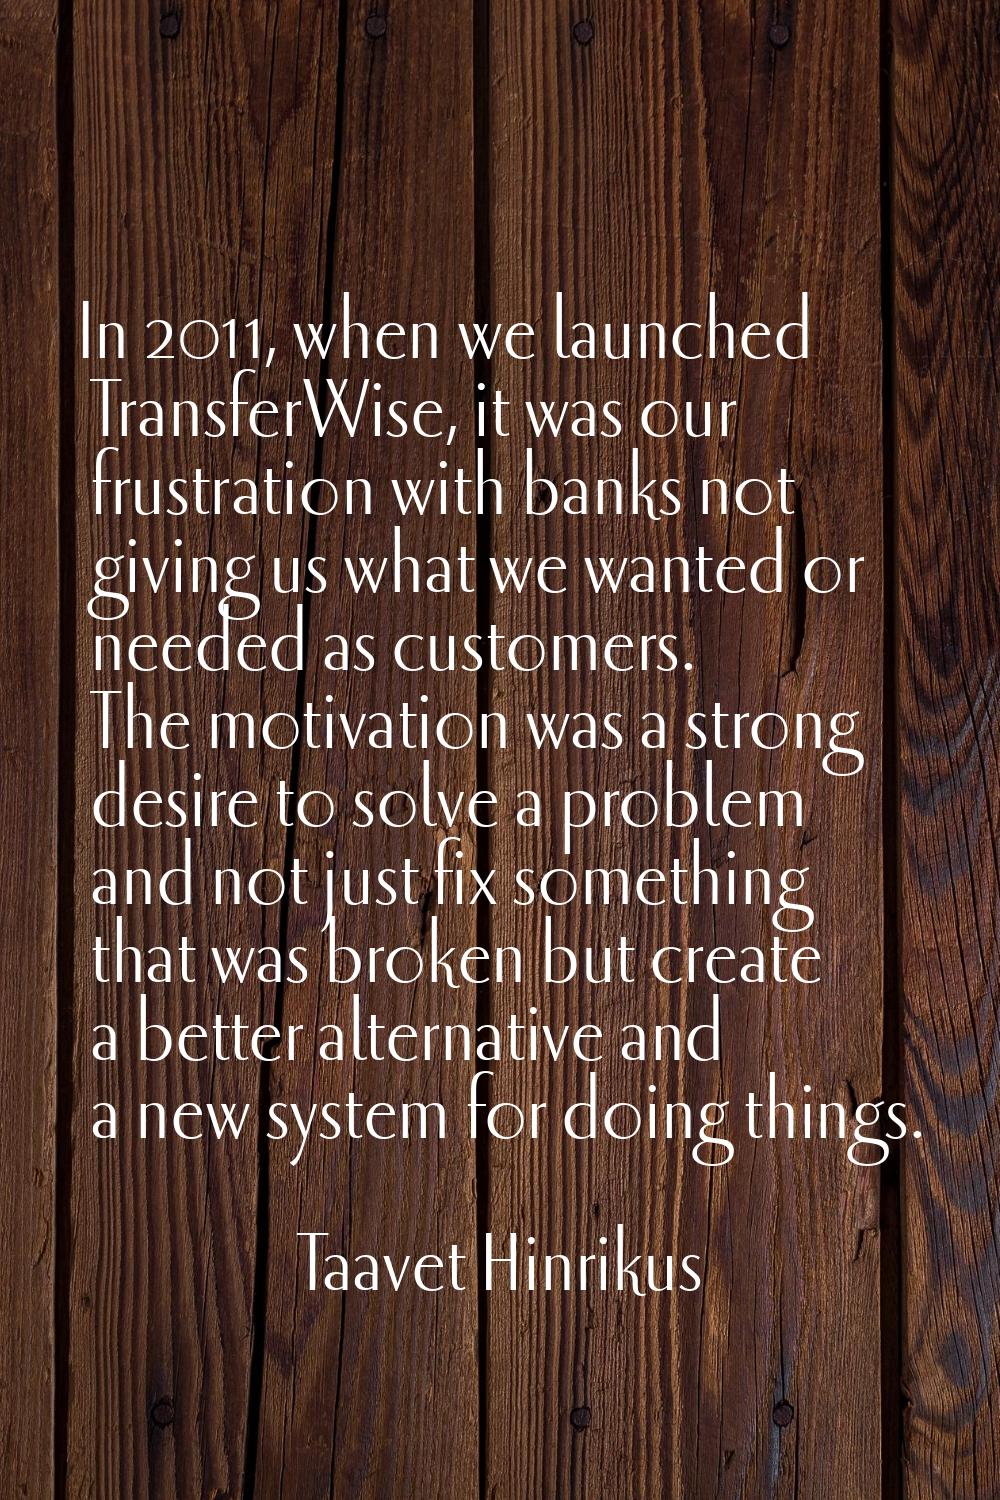 In 2011, when we launched TransferWise, it was our frustration with banks not giving us what we wan